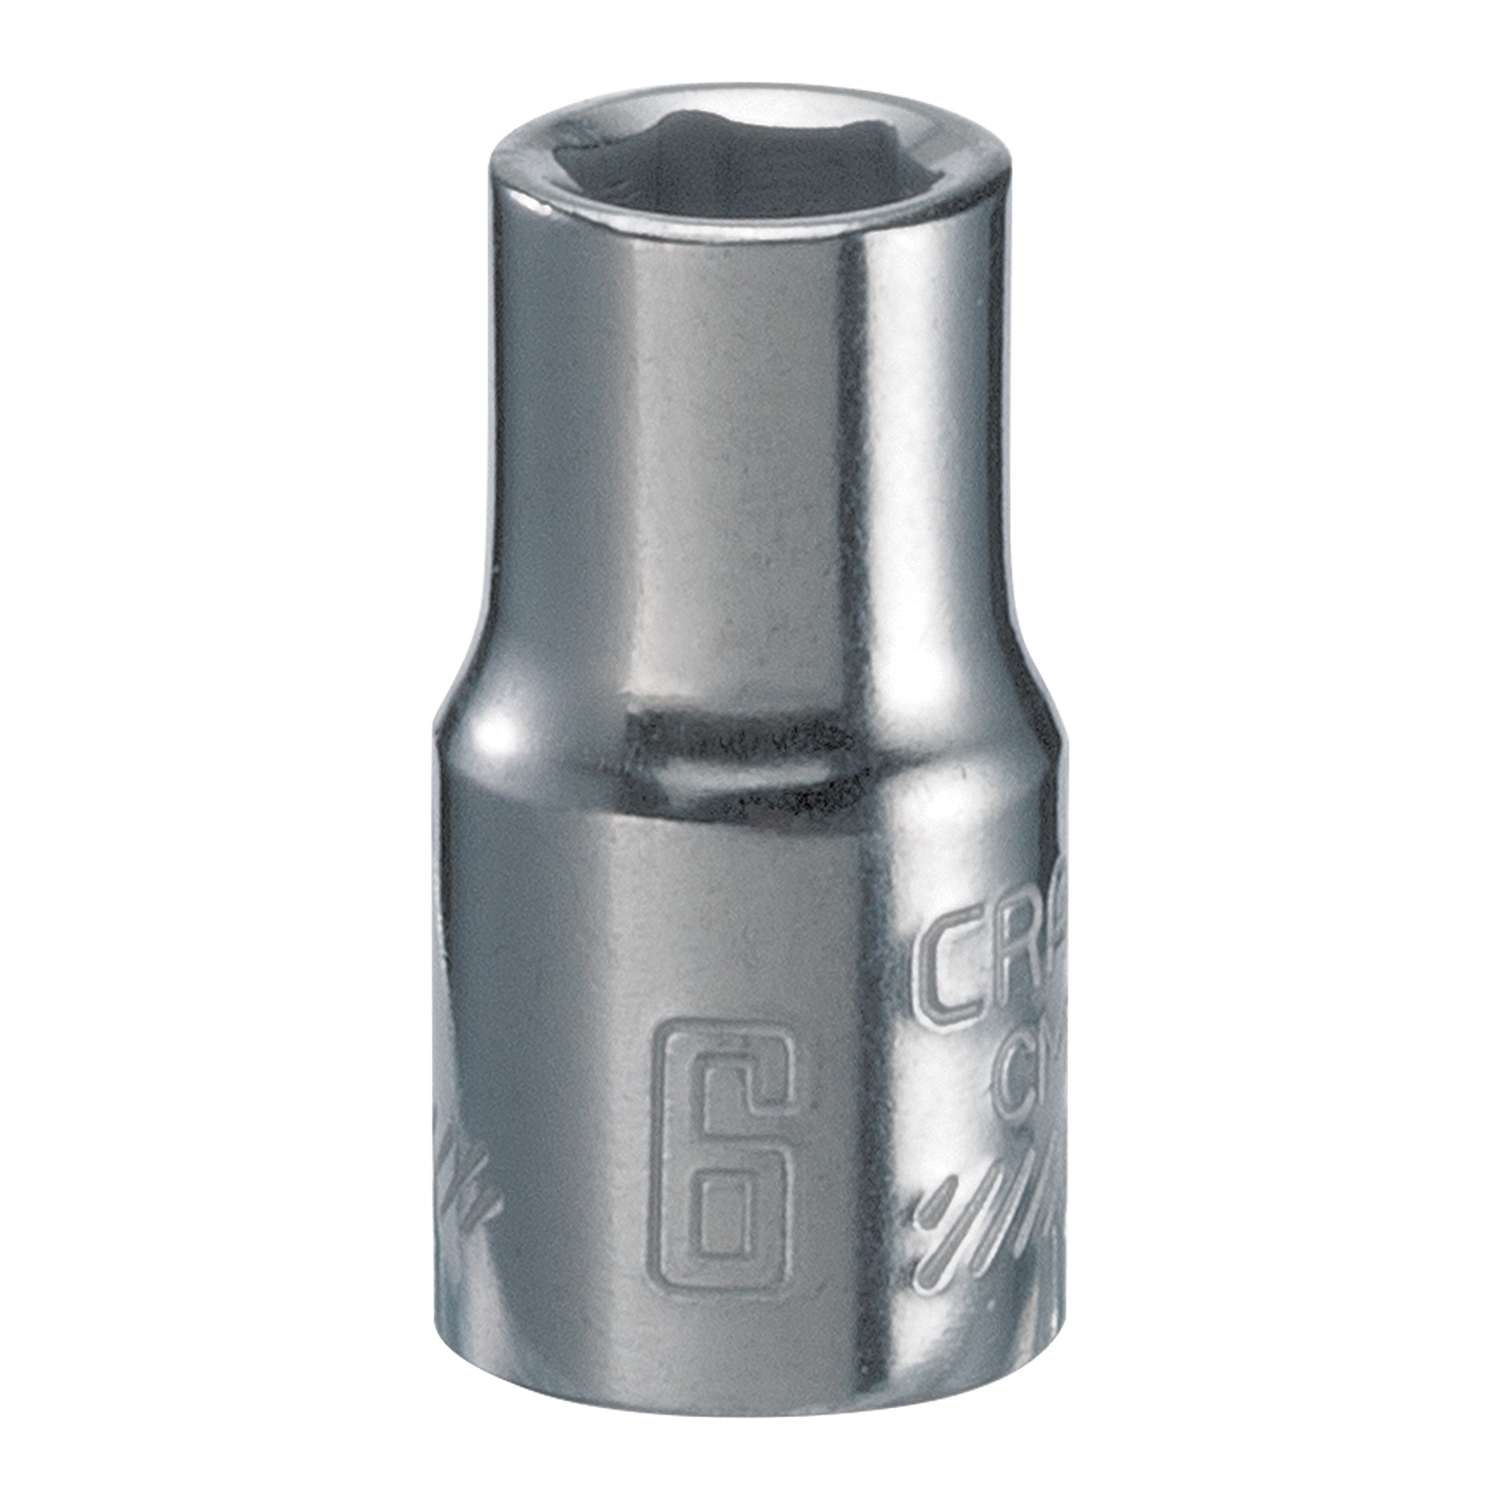 Craftsman Easy Read Socket 1/2 6-Point Drive Shallow or Deep Metric mm/SAE Inch 